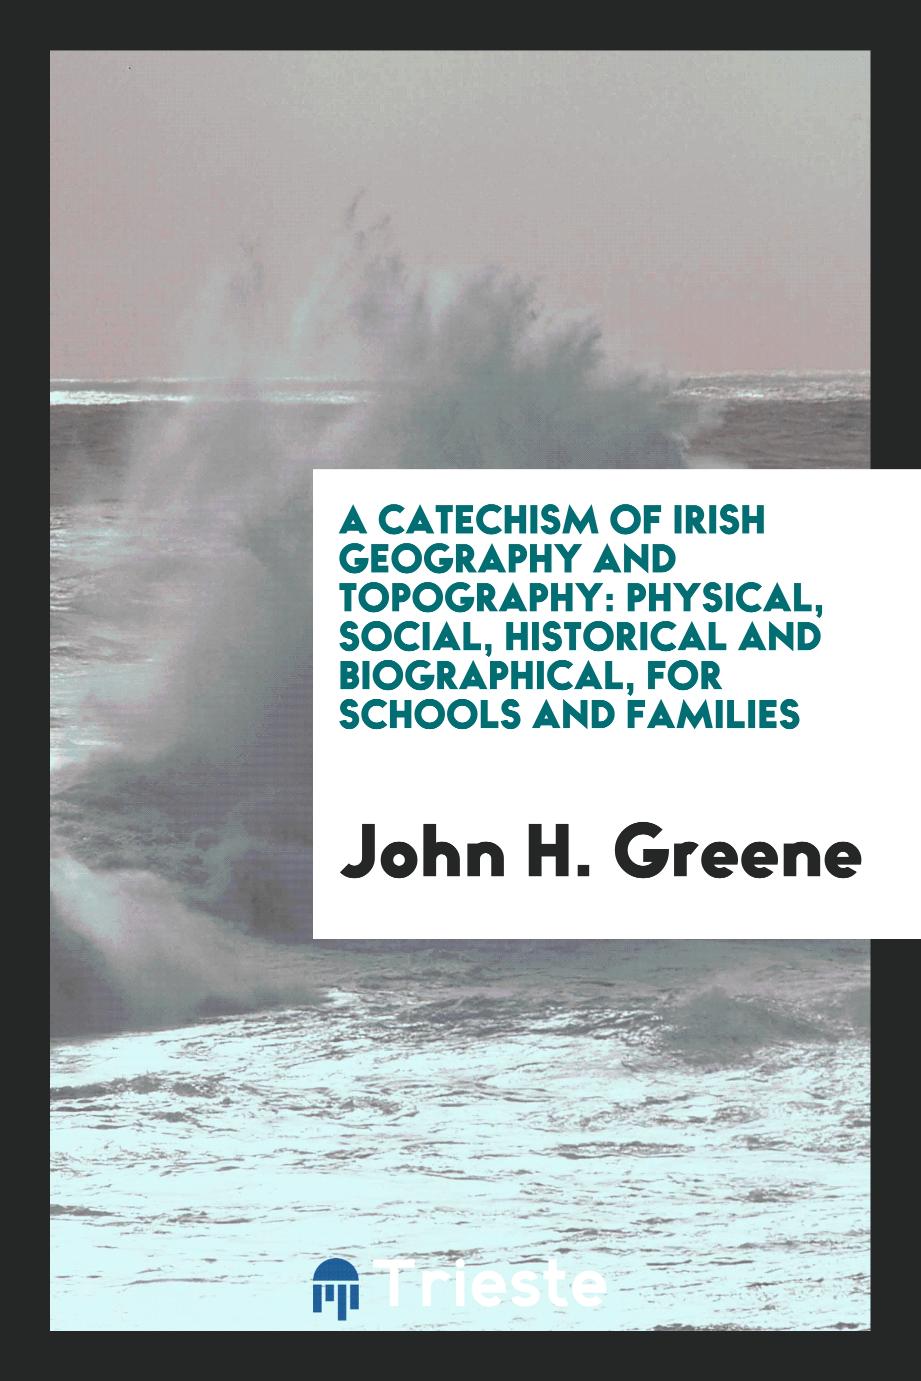 A Catechism of Irish Geography and Topography: Physical, Social, Historical and Biographical, for Schools and Families